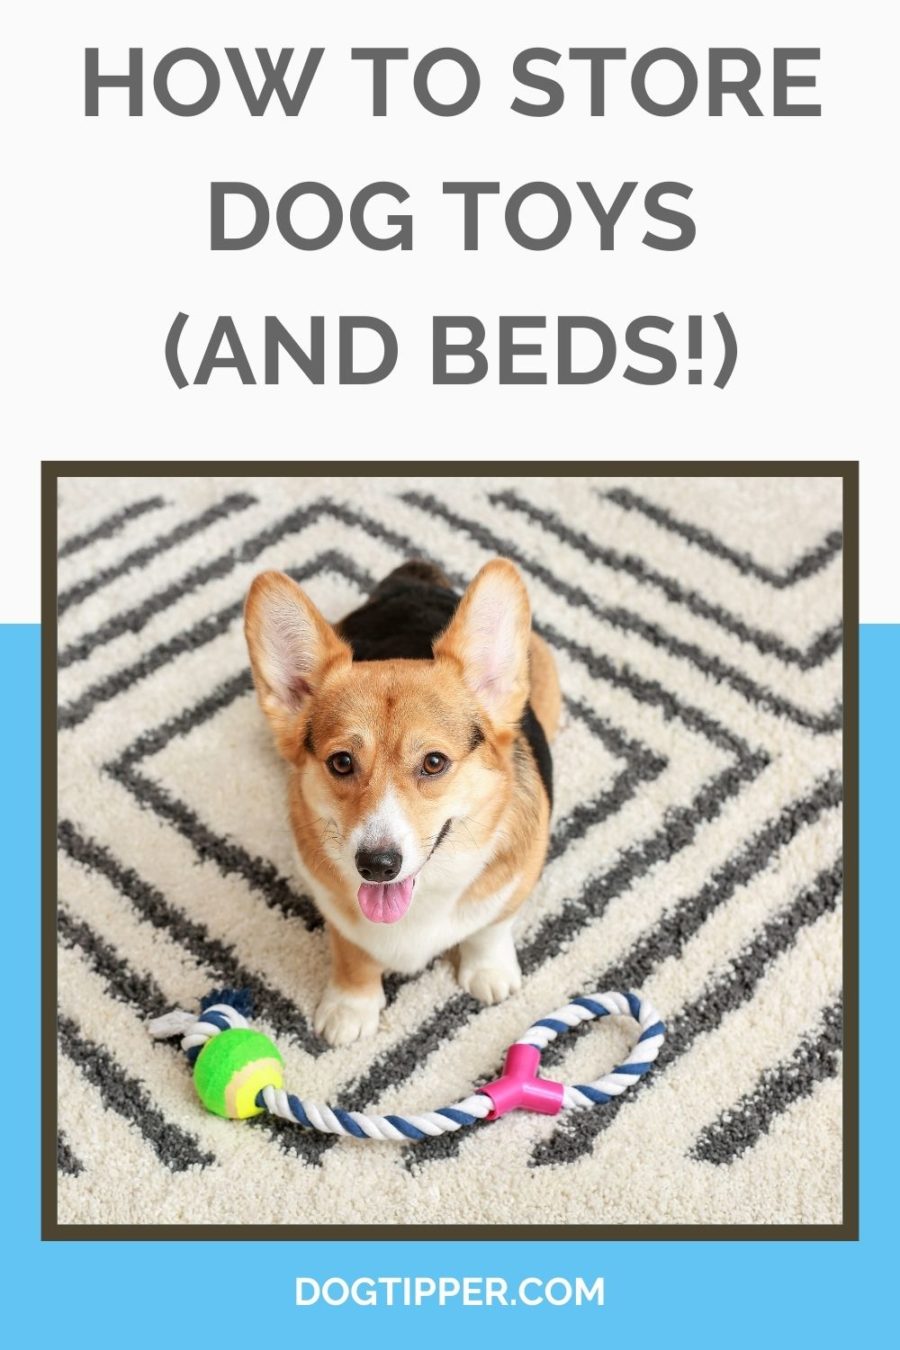 How to Store Dog Toys (and Beds!)